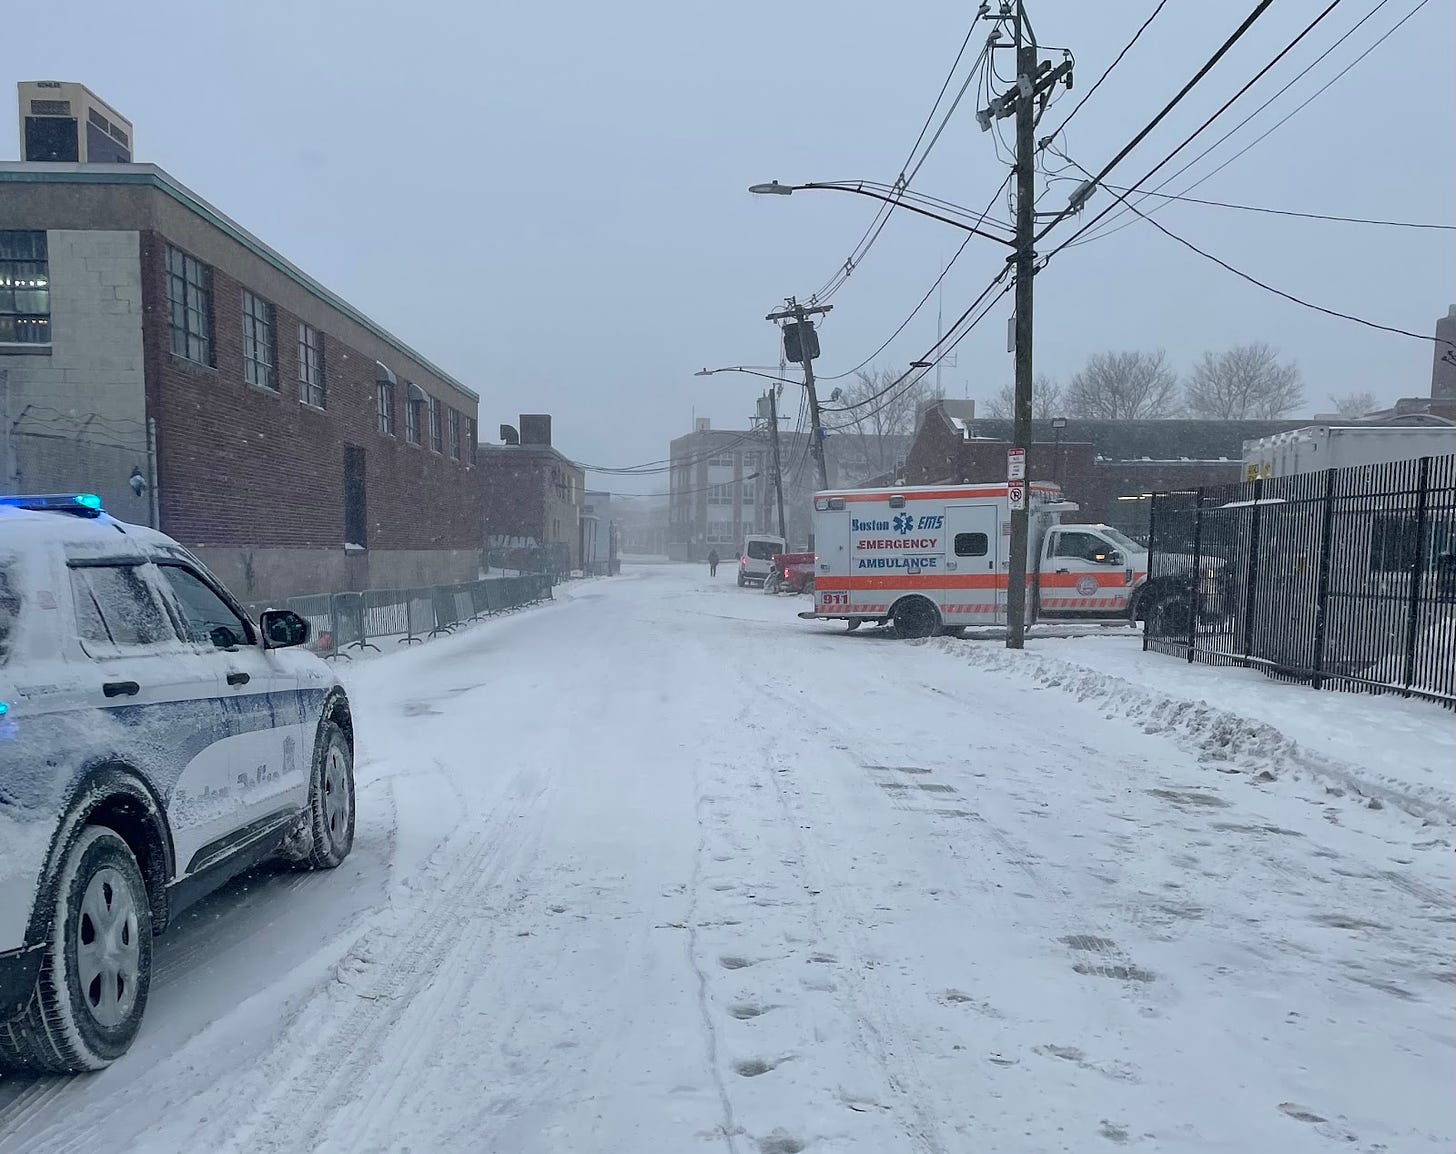 A view of Atkinson street blanketed with an inch of snow as more snowflakes come down. The street is clear except for a police cruiser, ambulance, and staff member walking at the end of the street